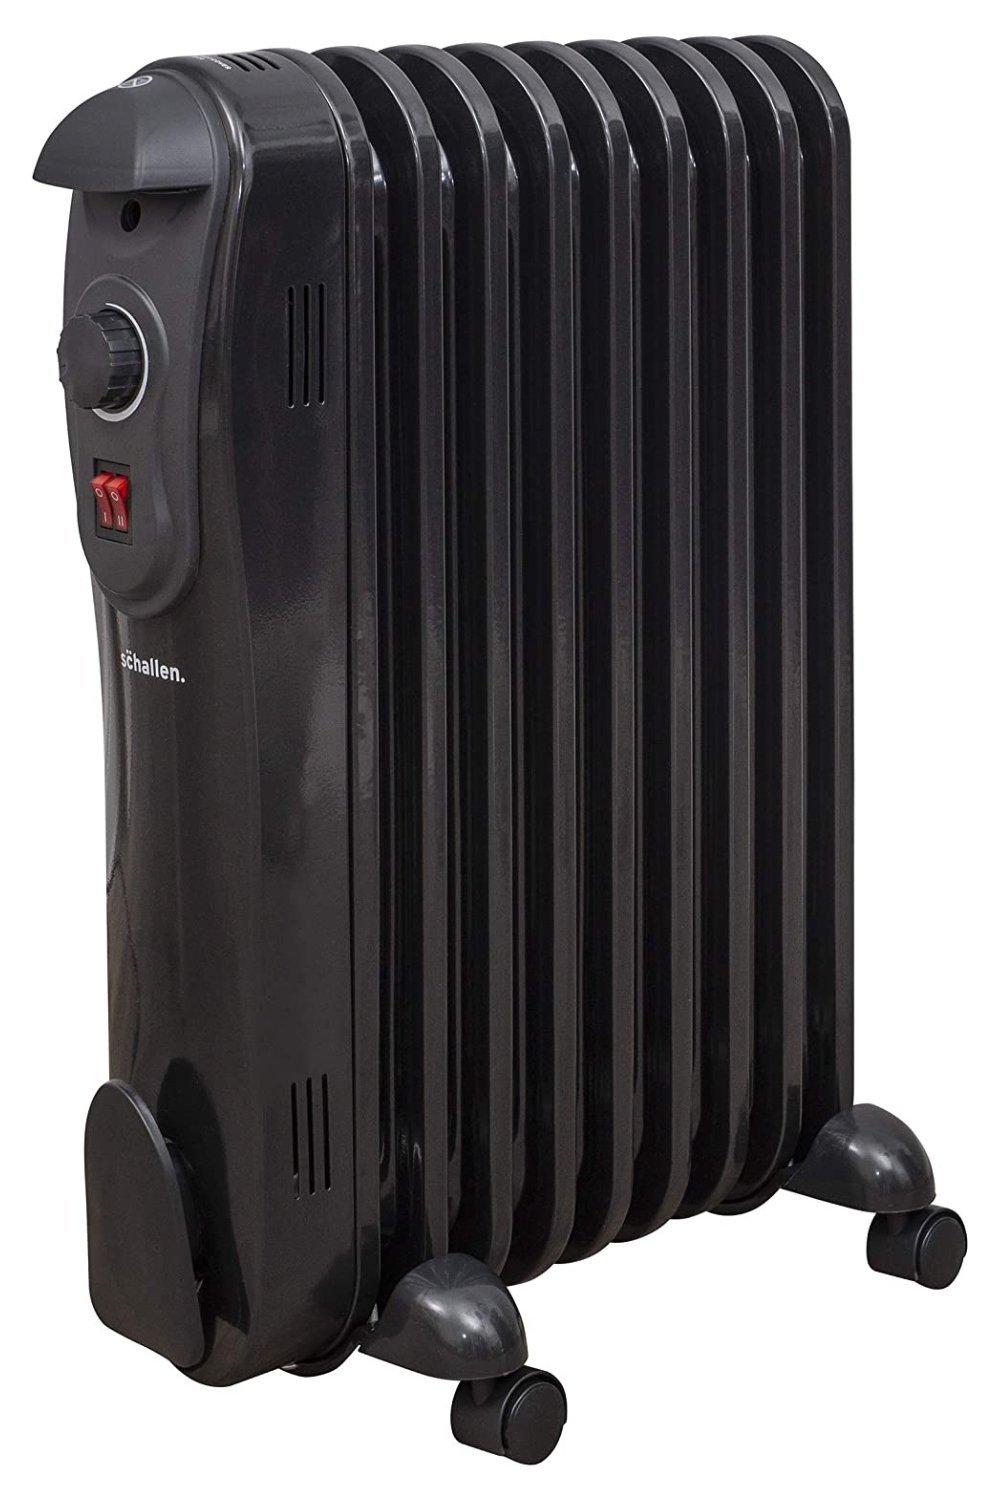 2000W 9 Fin Portable Electric Slim Oil Filled Radiator Heater with Adjustable Temperature Thermostat